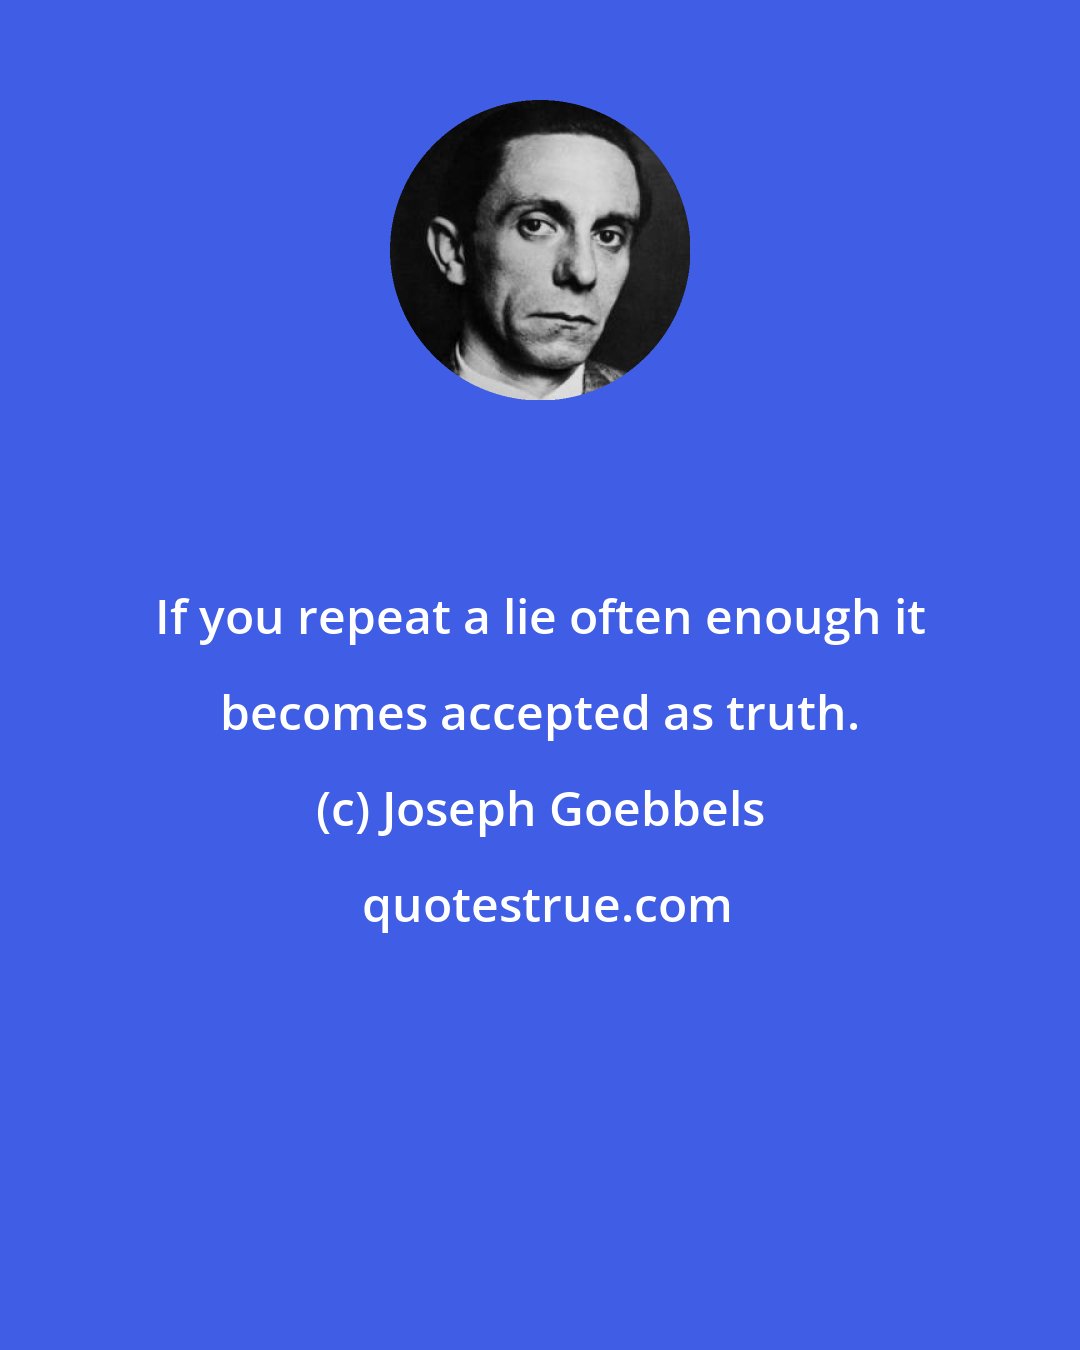 Joseph Goebbels: If you repeat a lie often enough it becomes accepted as truth.